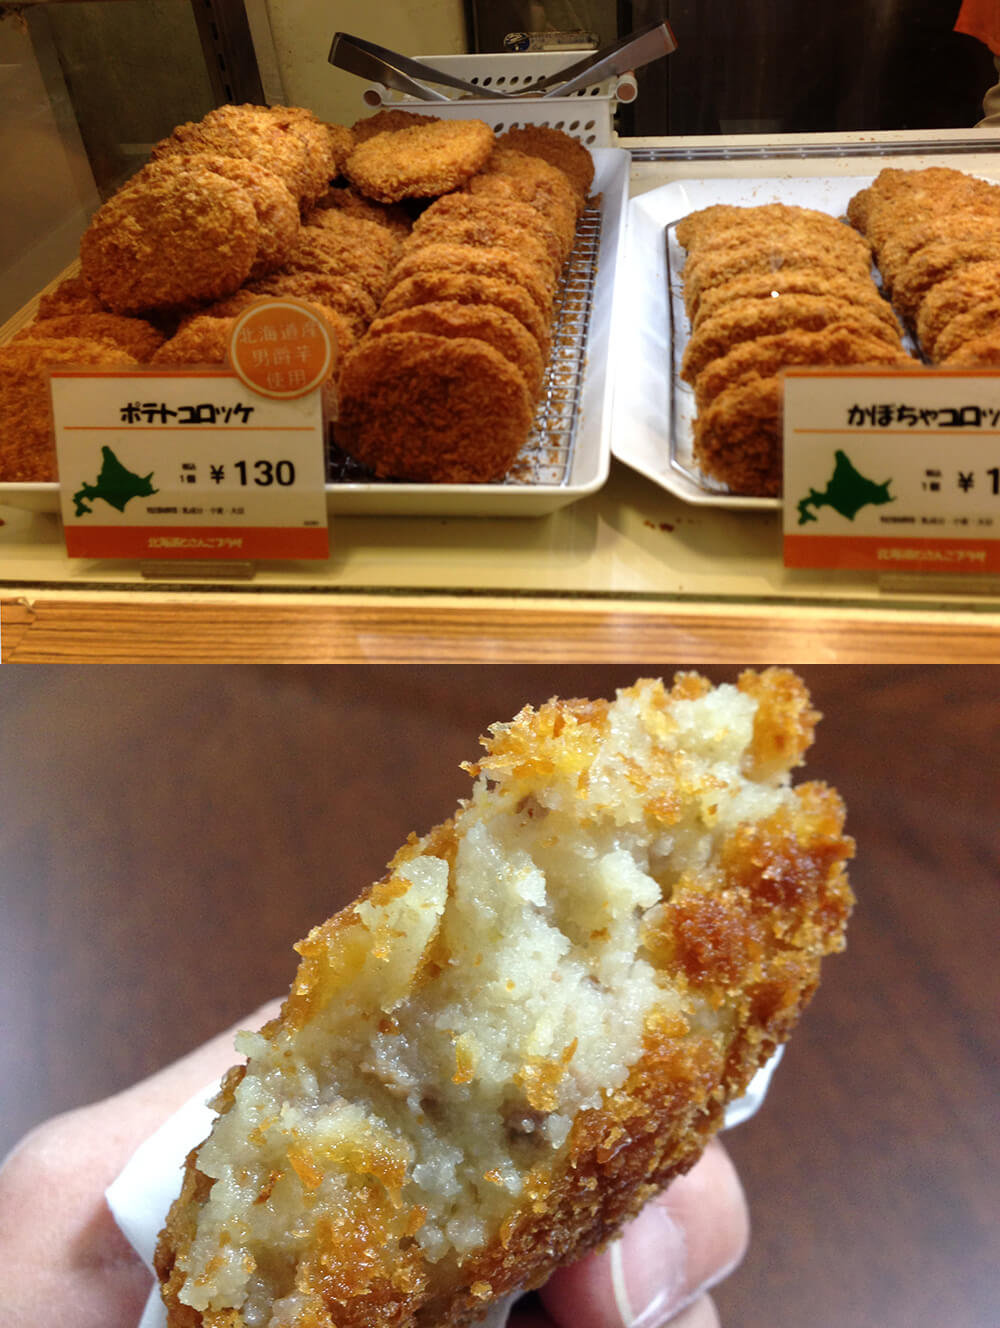 Display of the different kinds of fried food from the shop in Japan.